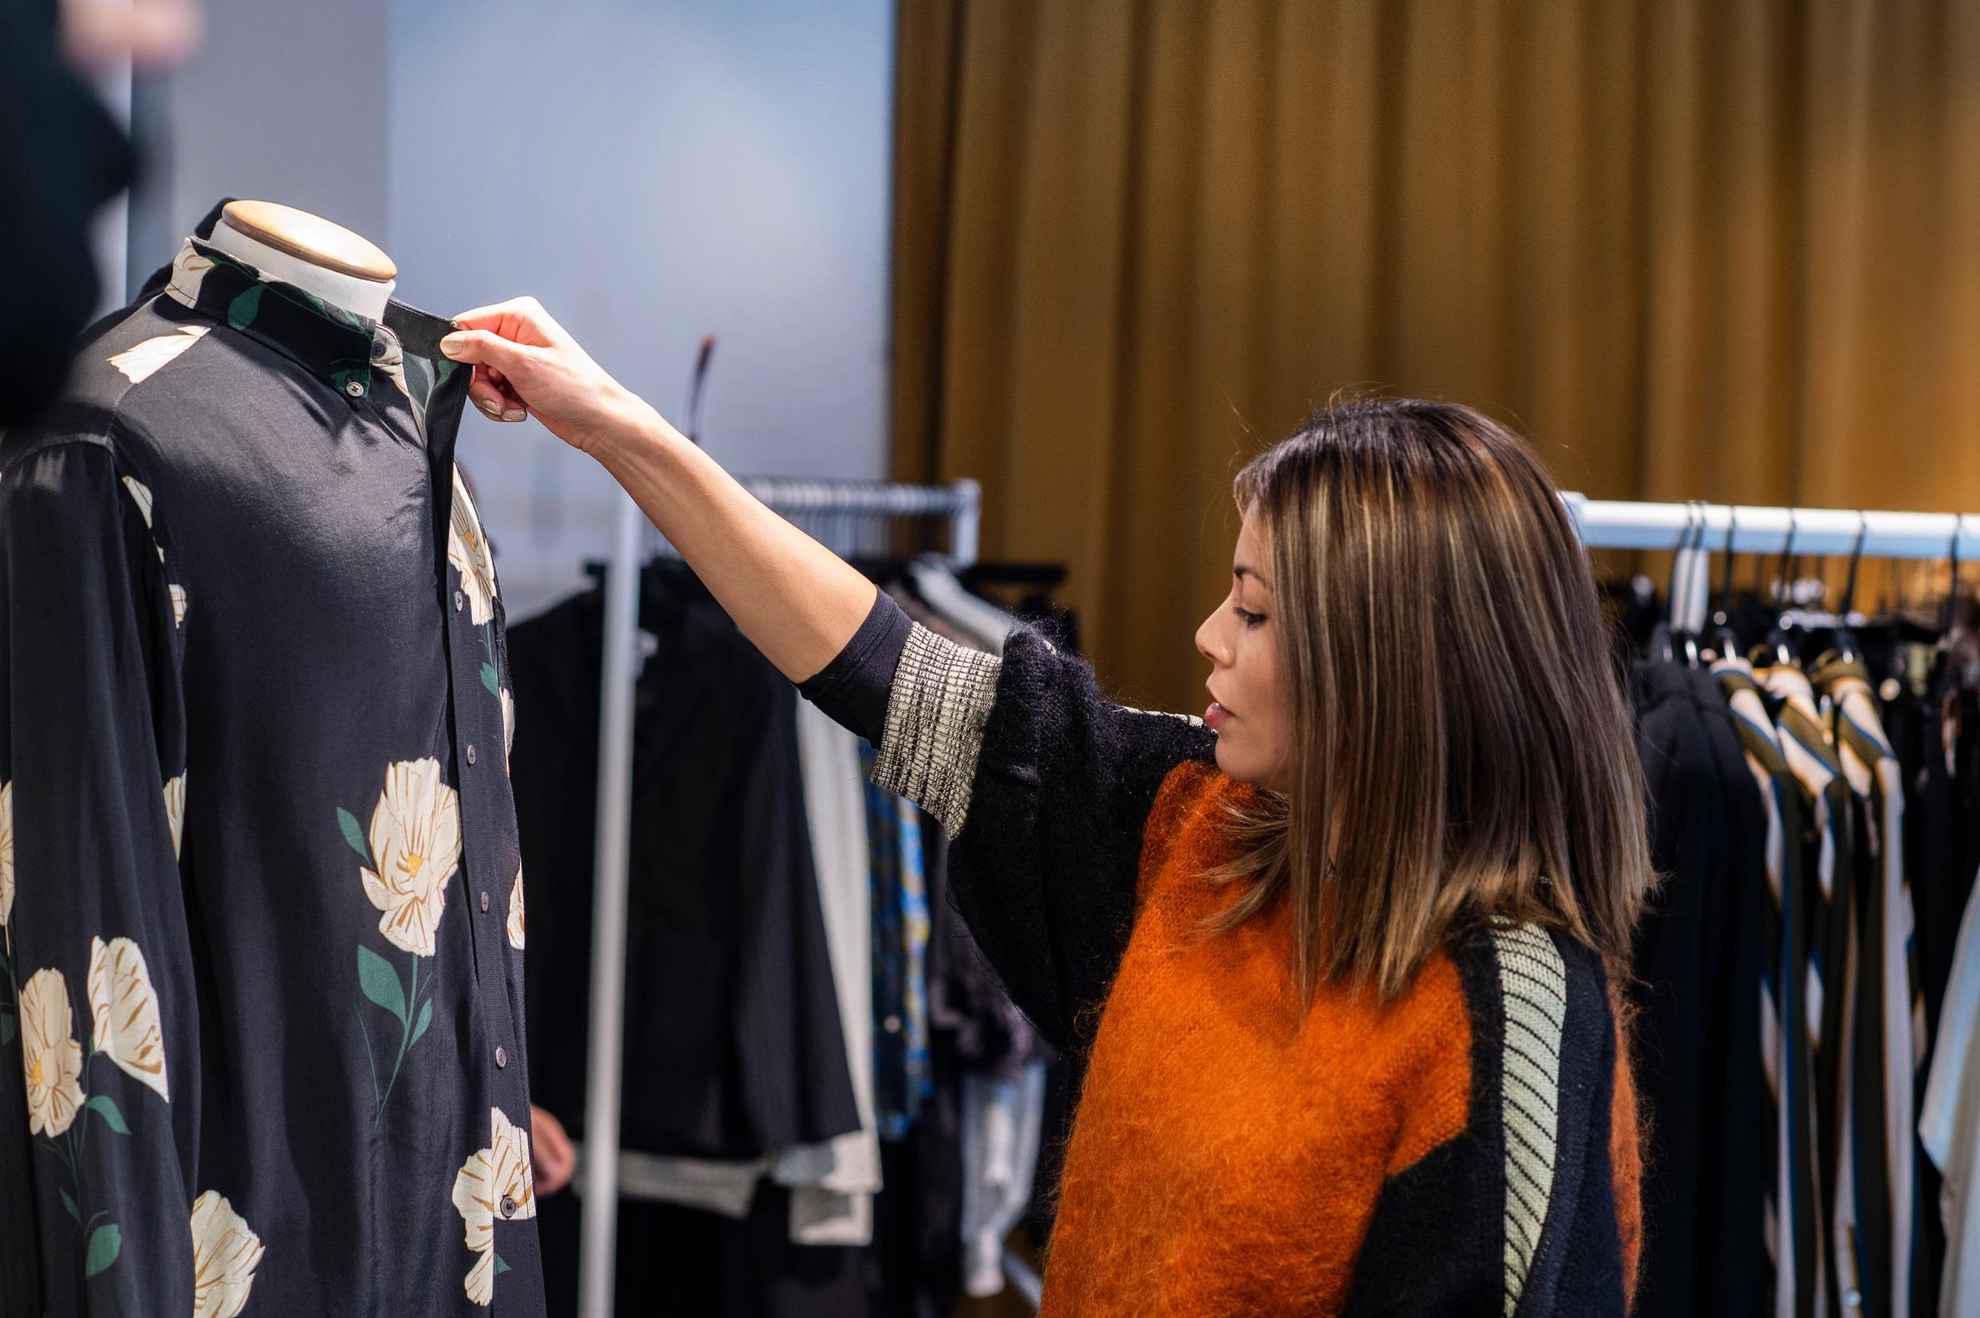 A woman touching and looking at a shirt with a floral pattern on a mannequin in a shop.